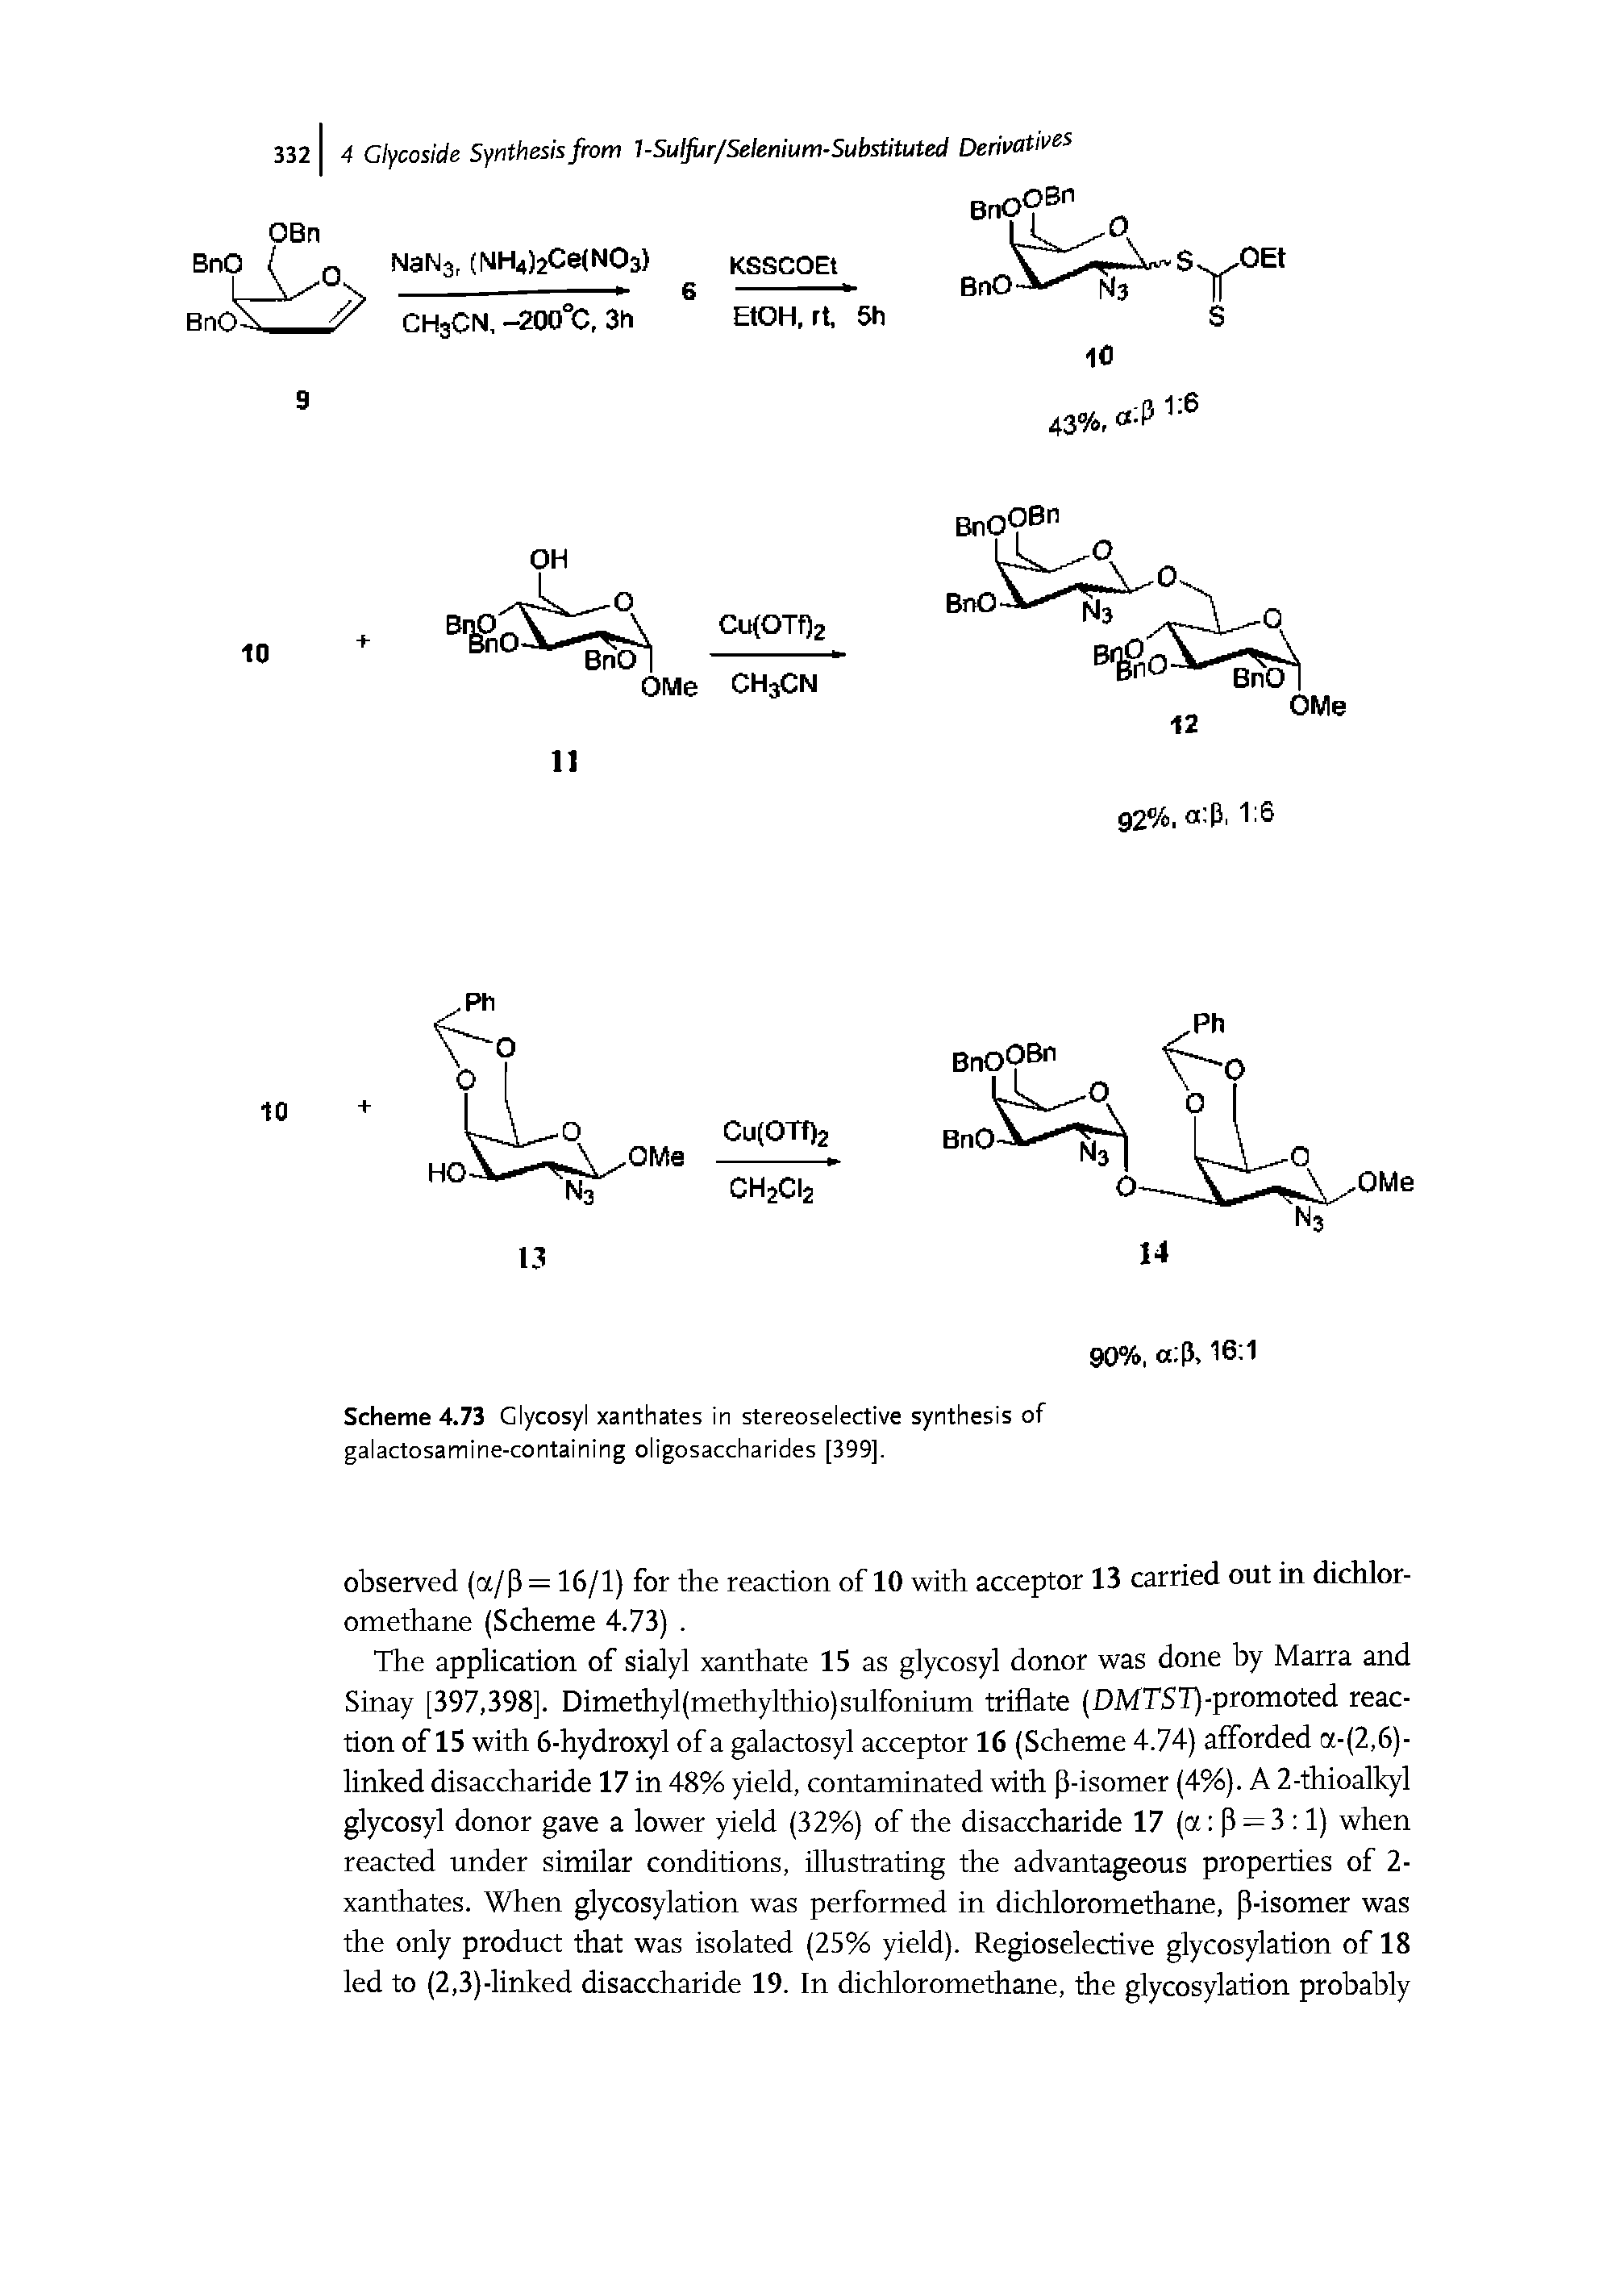 Scheme 4.73 Glycosyl xanthates in stereoselective synthesis of galactosamine-containing oligosaccharides [399],...